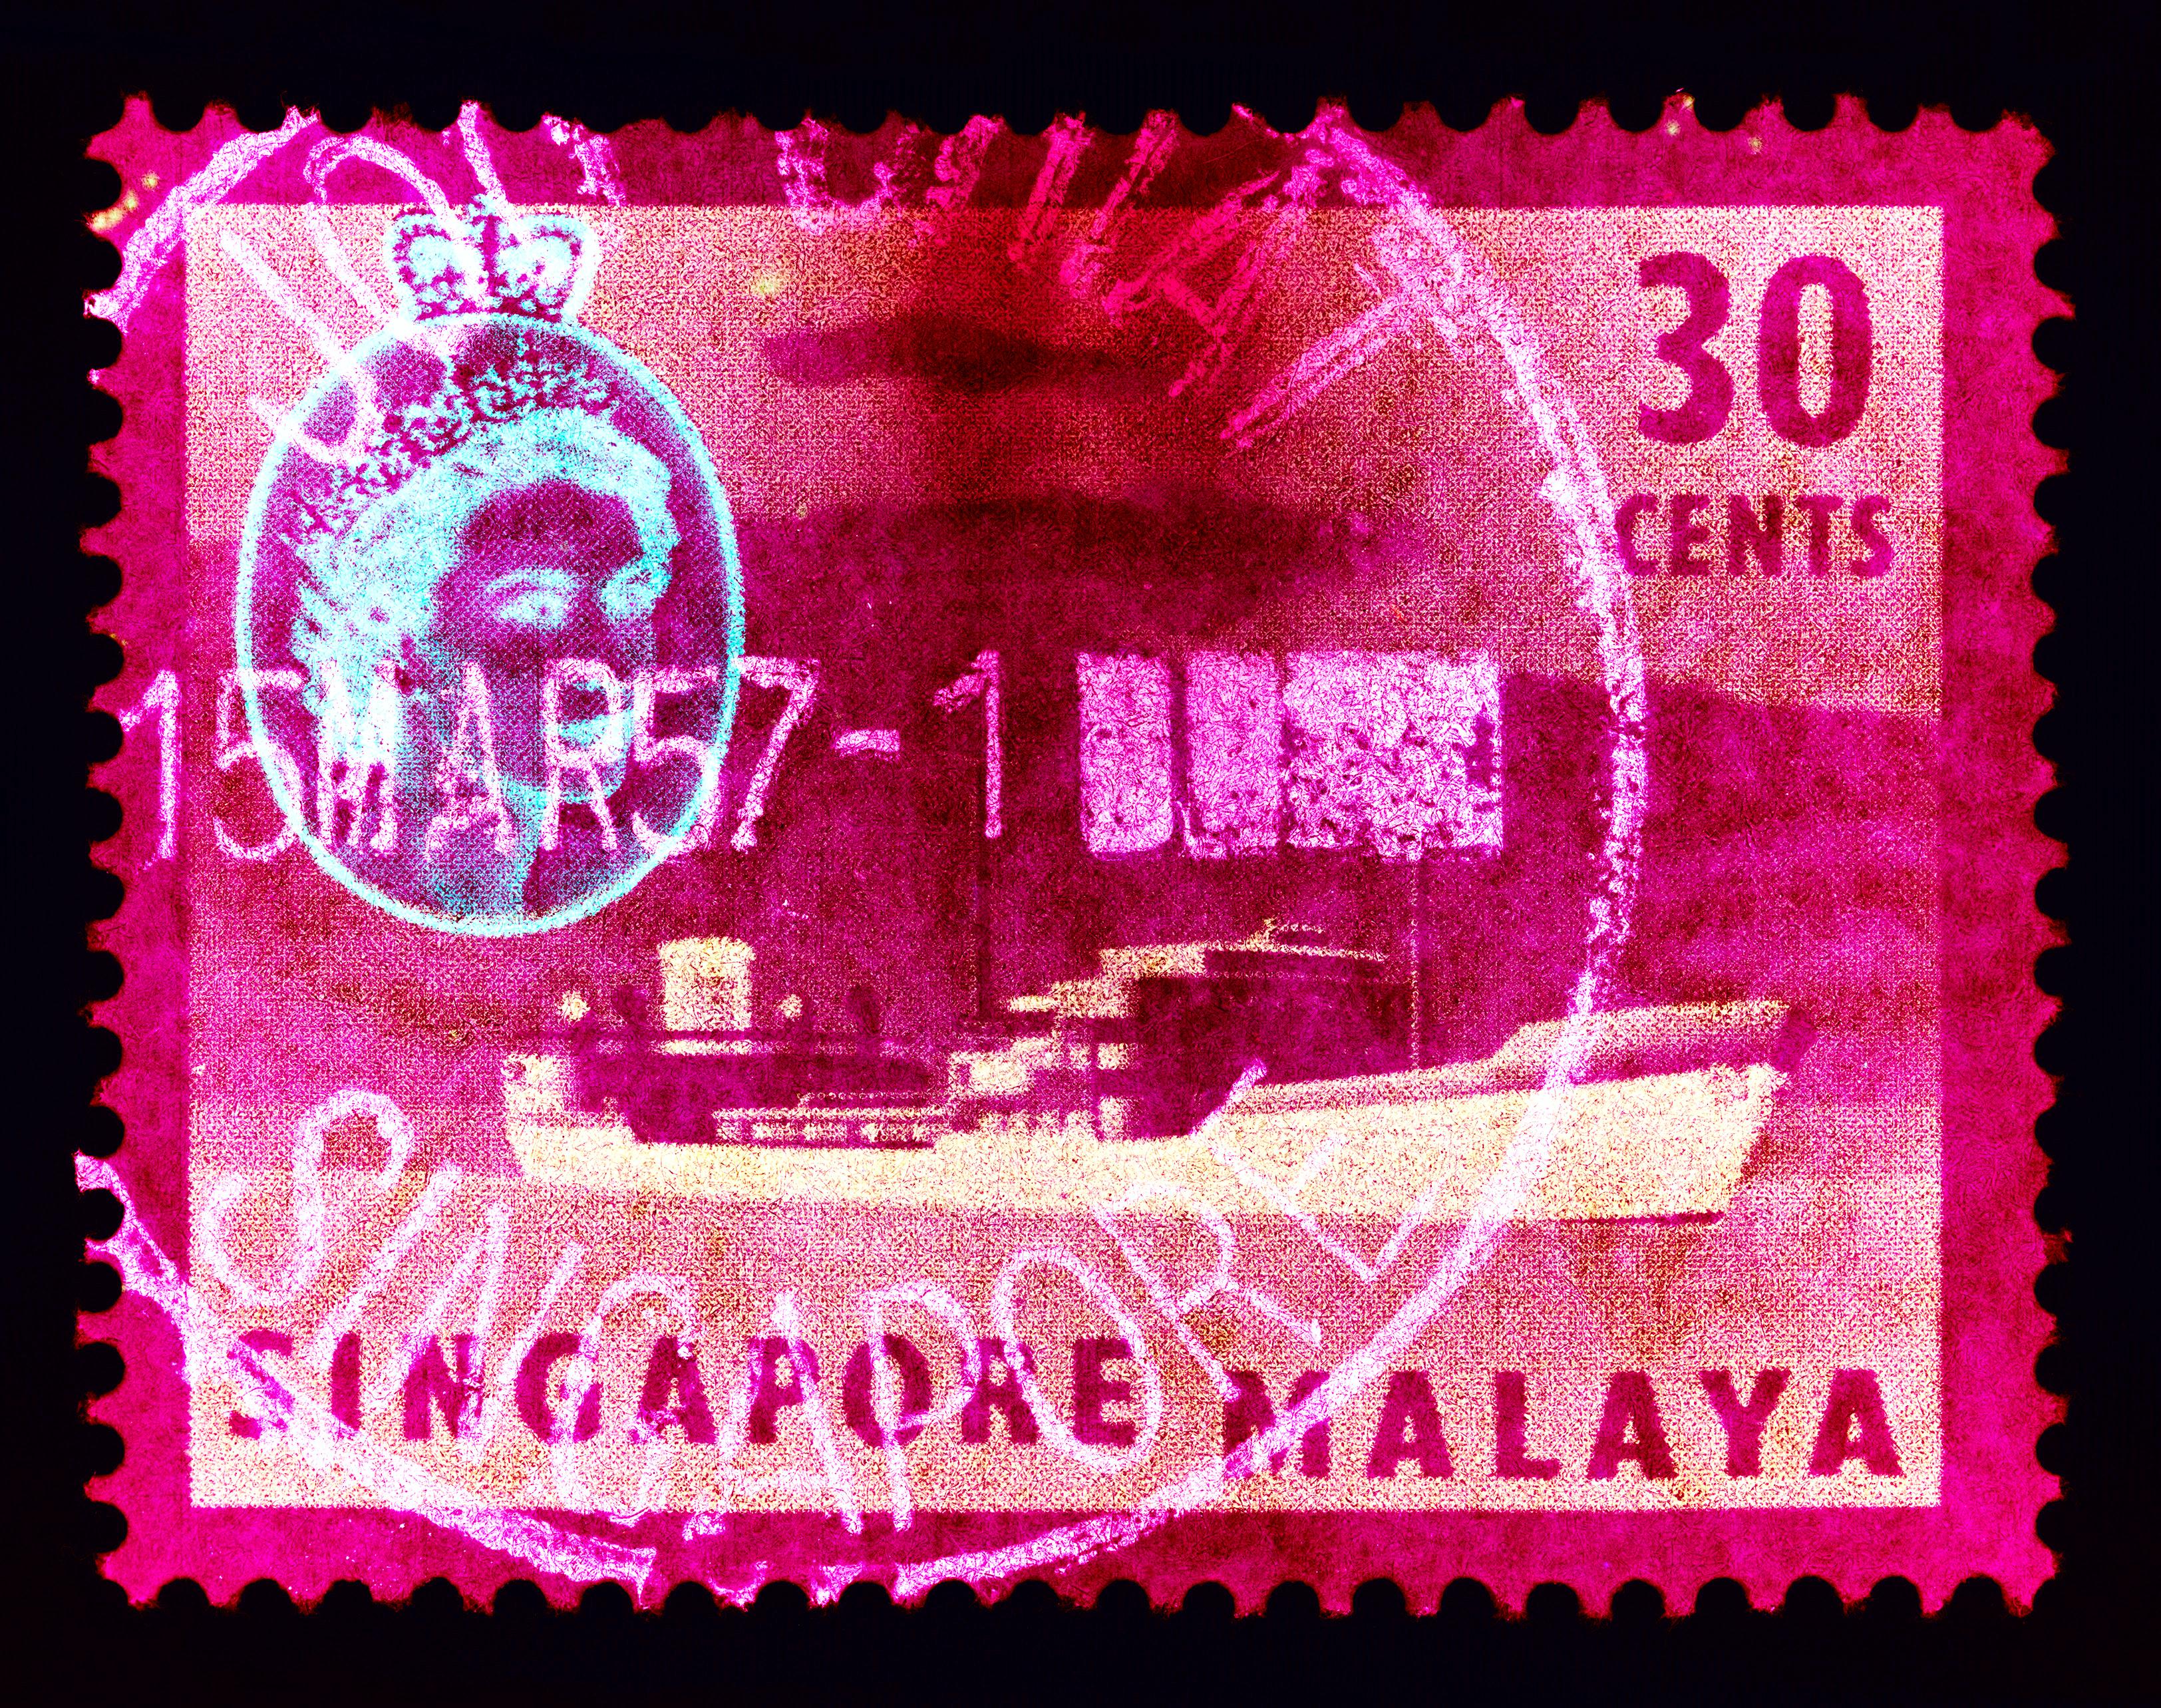 Heidler & Heeps Print - Singapore Stamp Collection, 30 Cents QEII Oil Tanker Pink - Pop Art Color Photo